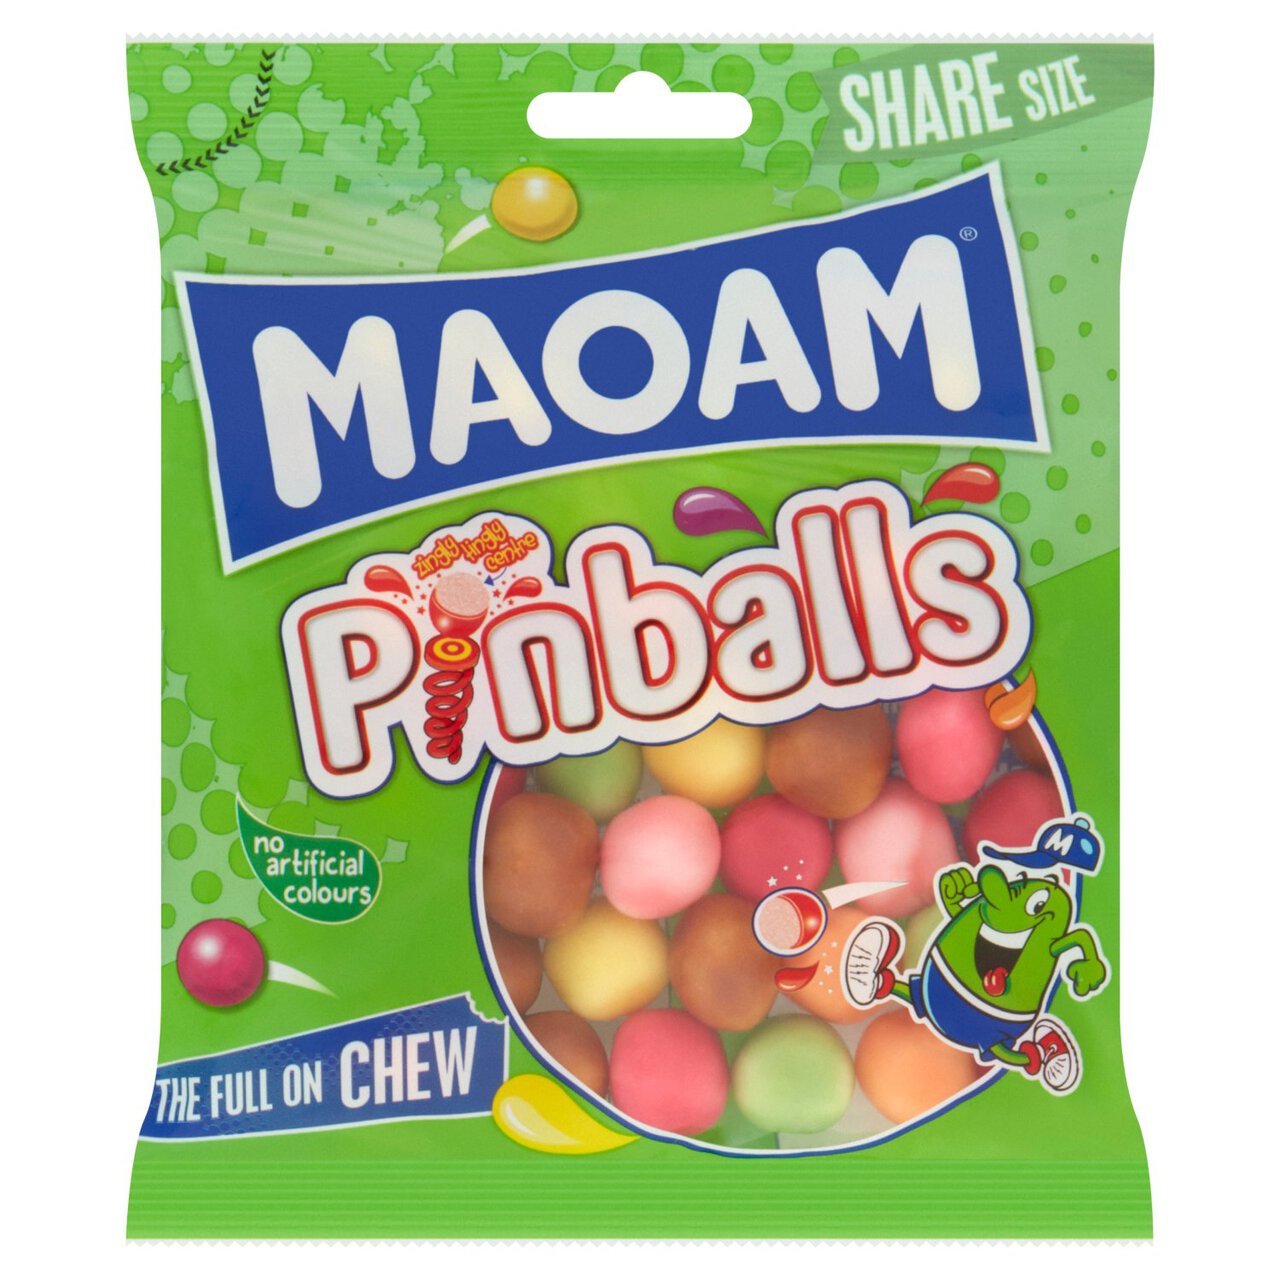 Maoam Pinballs Chewy Sweets Sharing Bag 140g 140g